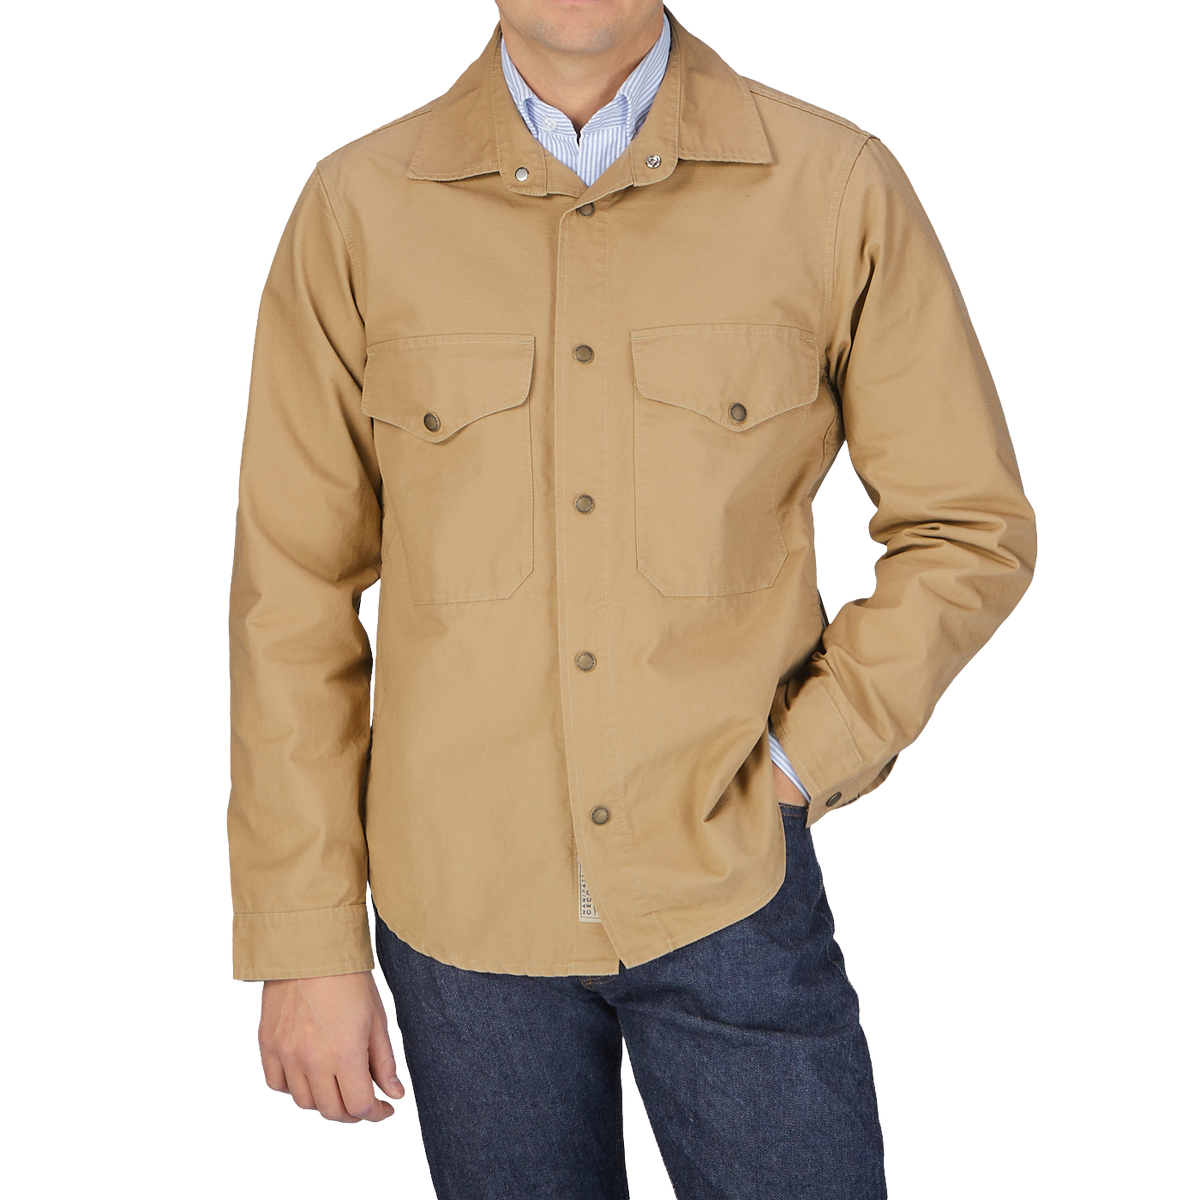 A man wearing a Camel Beige Cotton Ripstop Country Overshirt by Manifattura Ceccarelli and jeans.